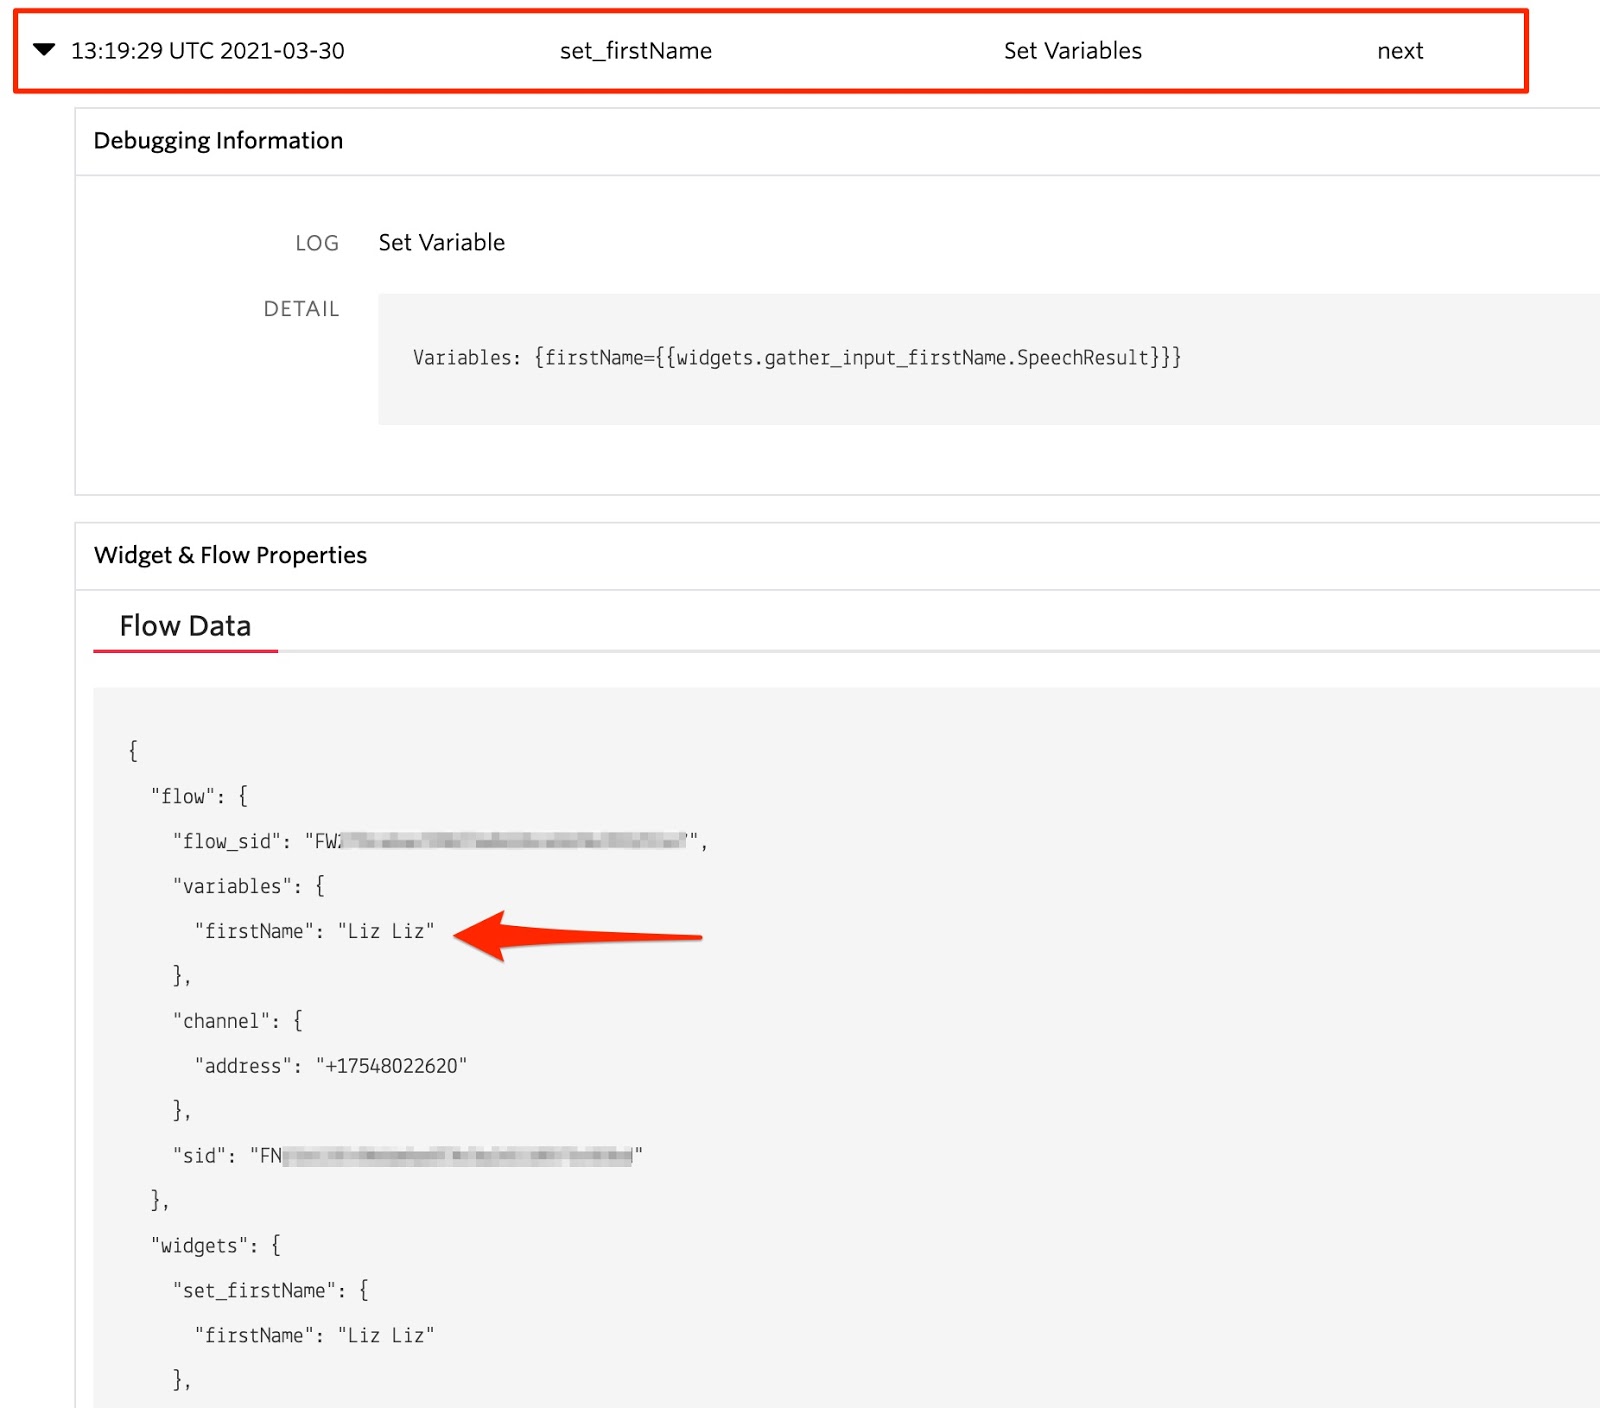 Image of an opened part of the Twilio studio logs that show where the firstName variable is set